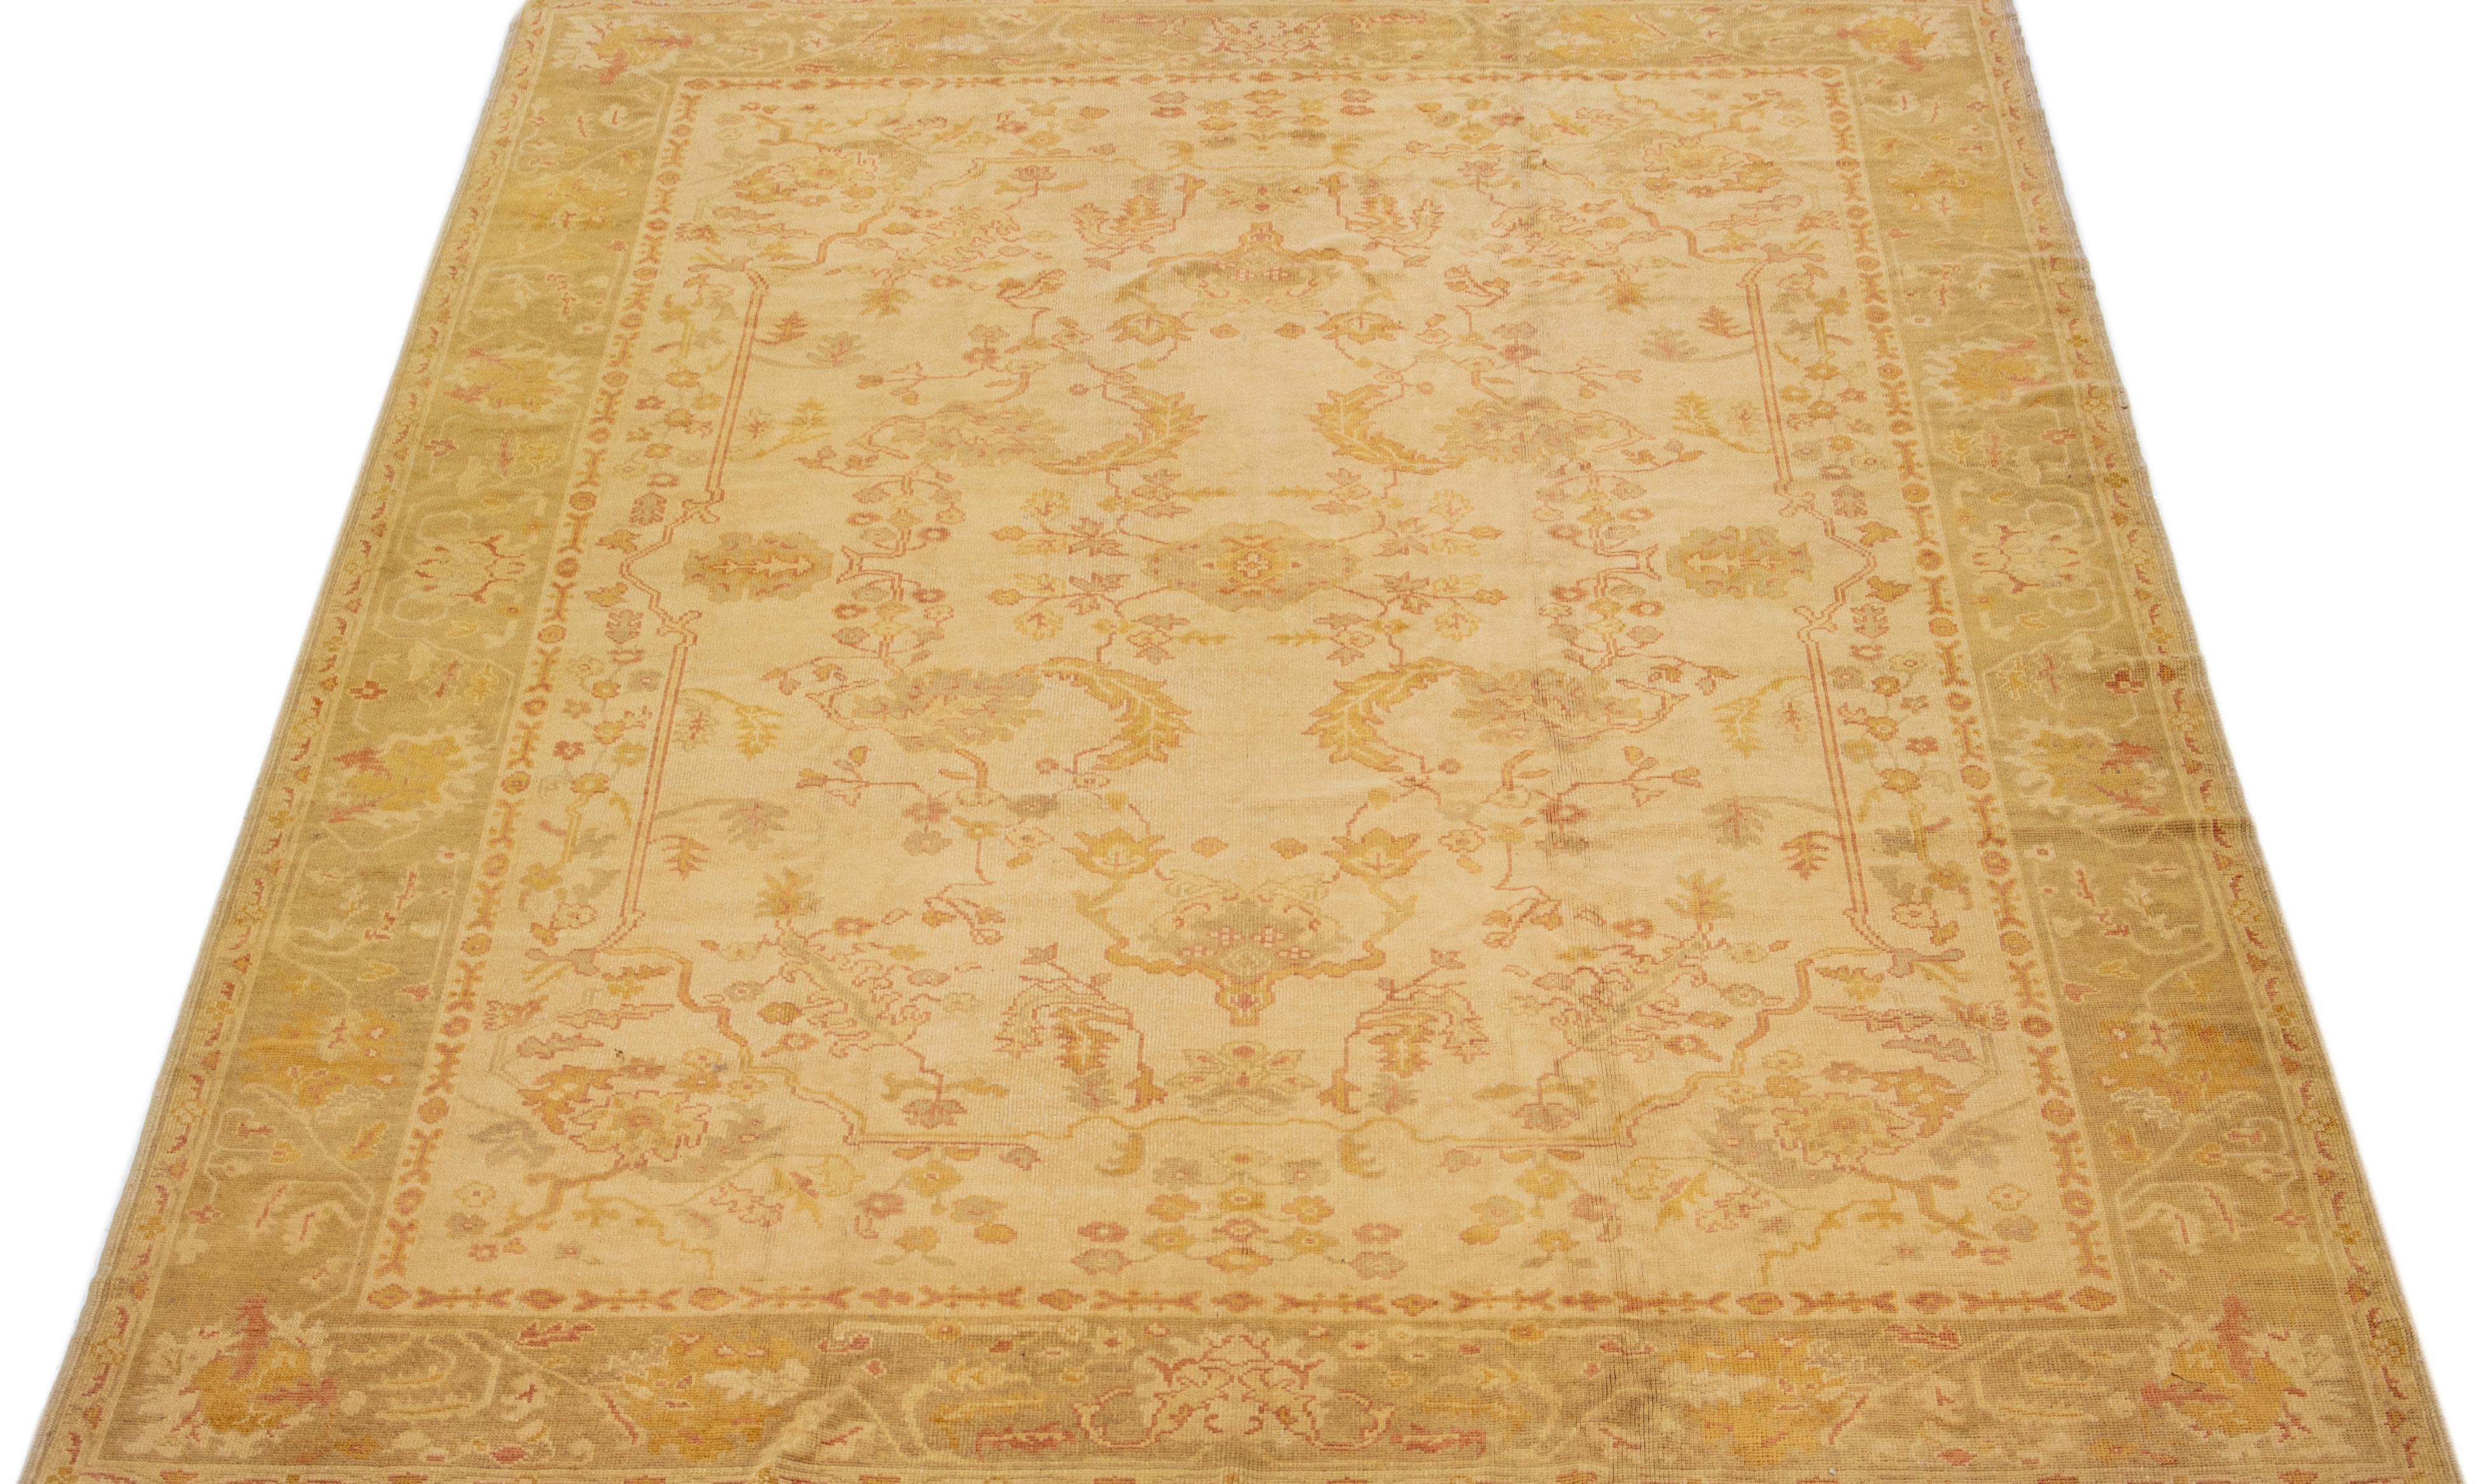 Beautiful Modern Turkish hand-knotted wool rug with a tan color field. This rug has a gray designed frame with accent colors of rust and yellow in a gorgeous all-over geometric floral design.

This rug measures: 10'3